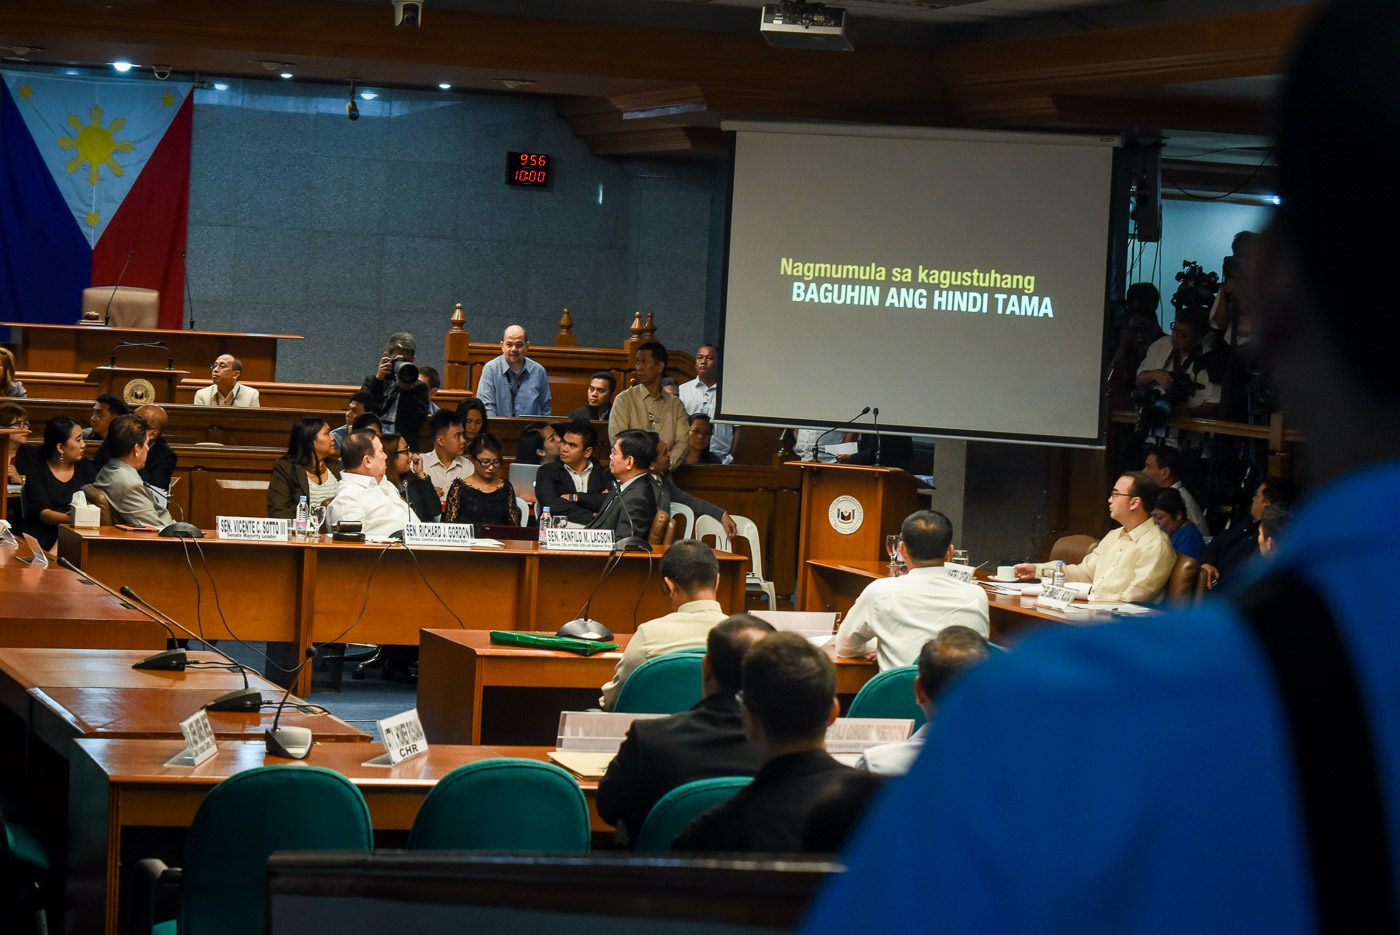 ‘Foreign media’ gets special mention in Senate EJK probe